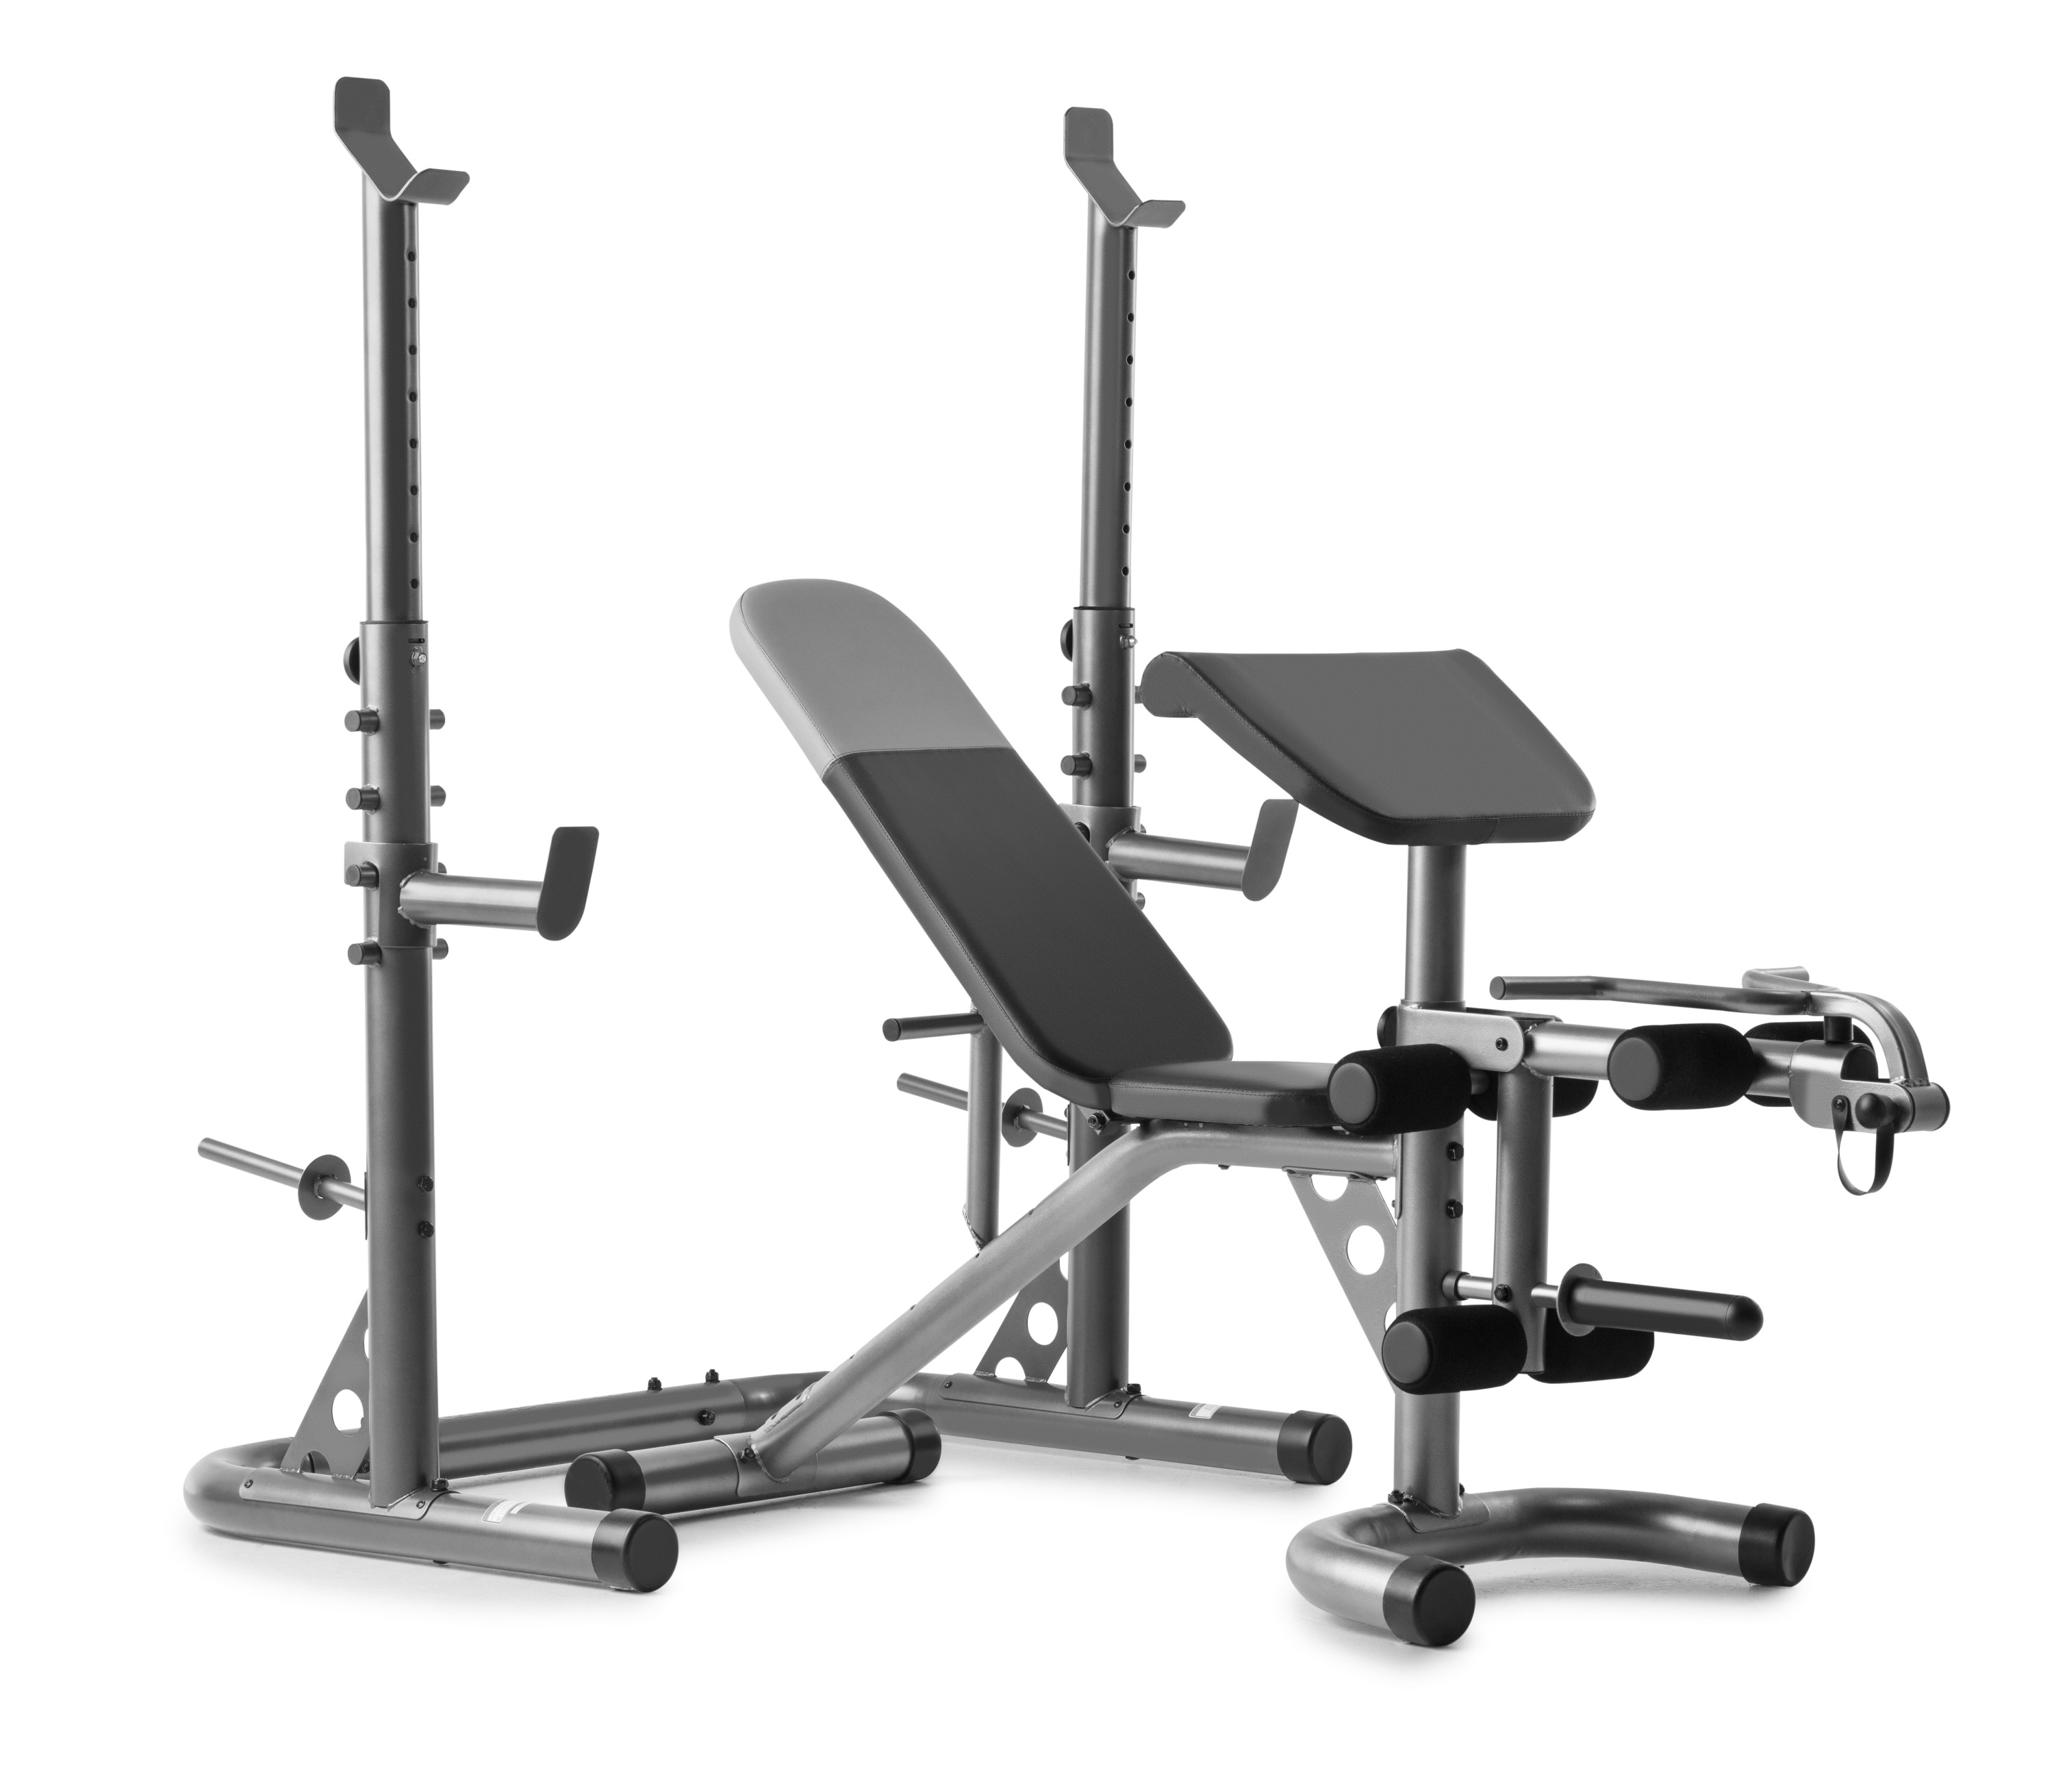 Benches Weider Xr 61 Multi Position Weight Bench With Leg Developer And Exercise Chart Strength Training